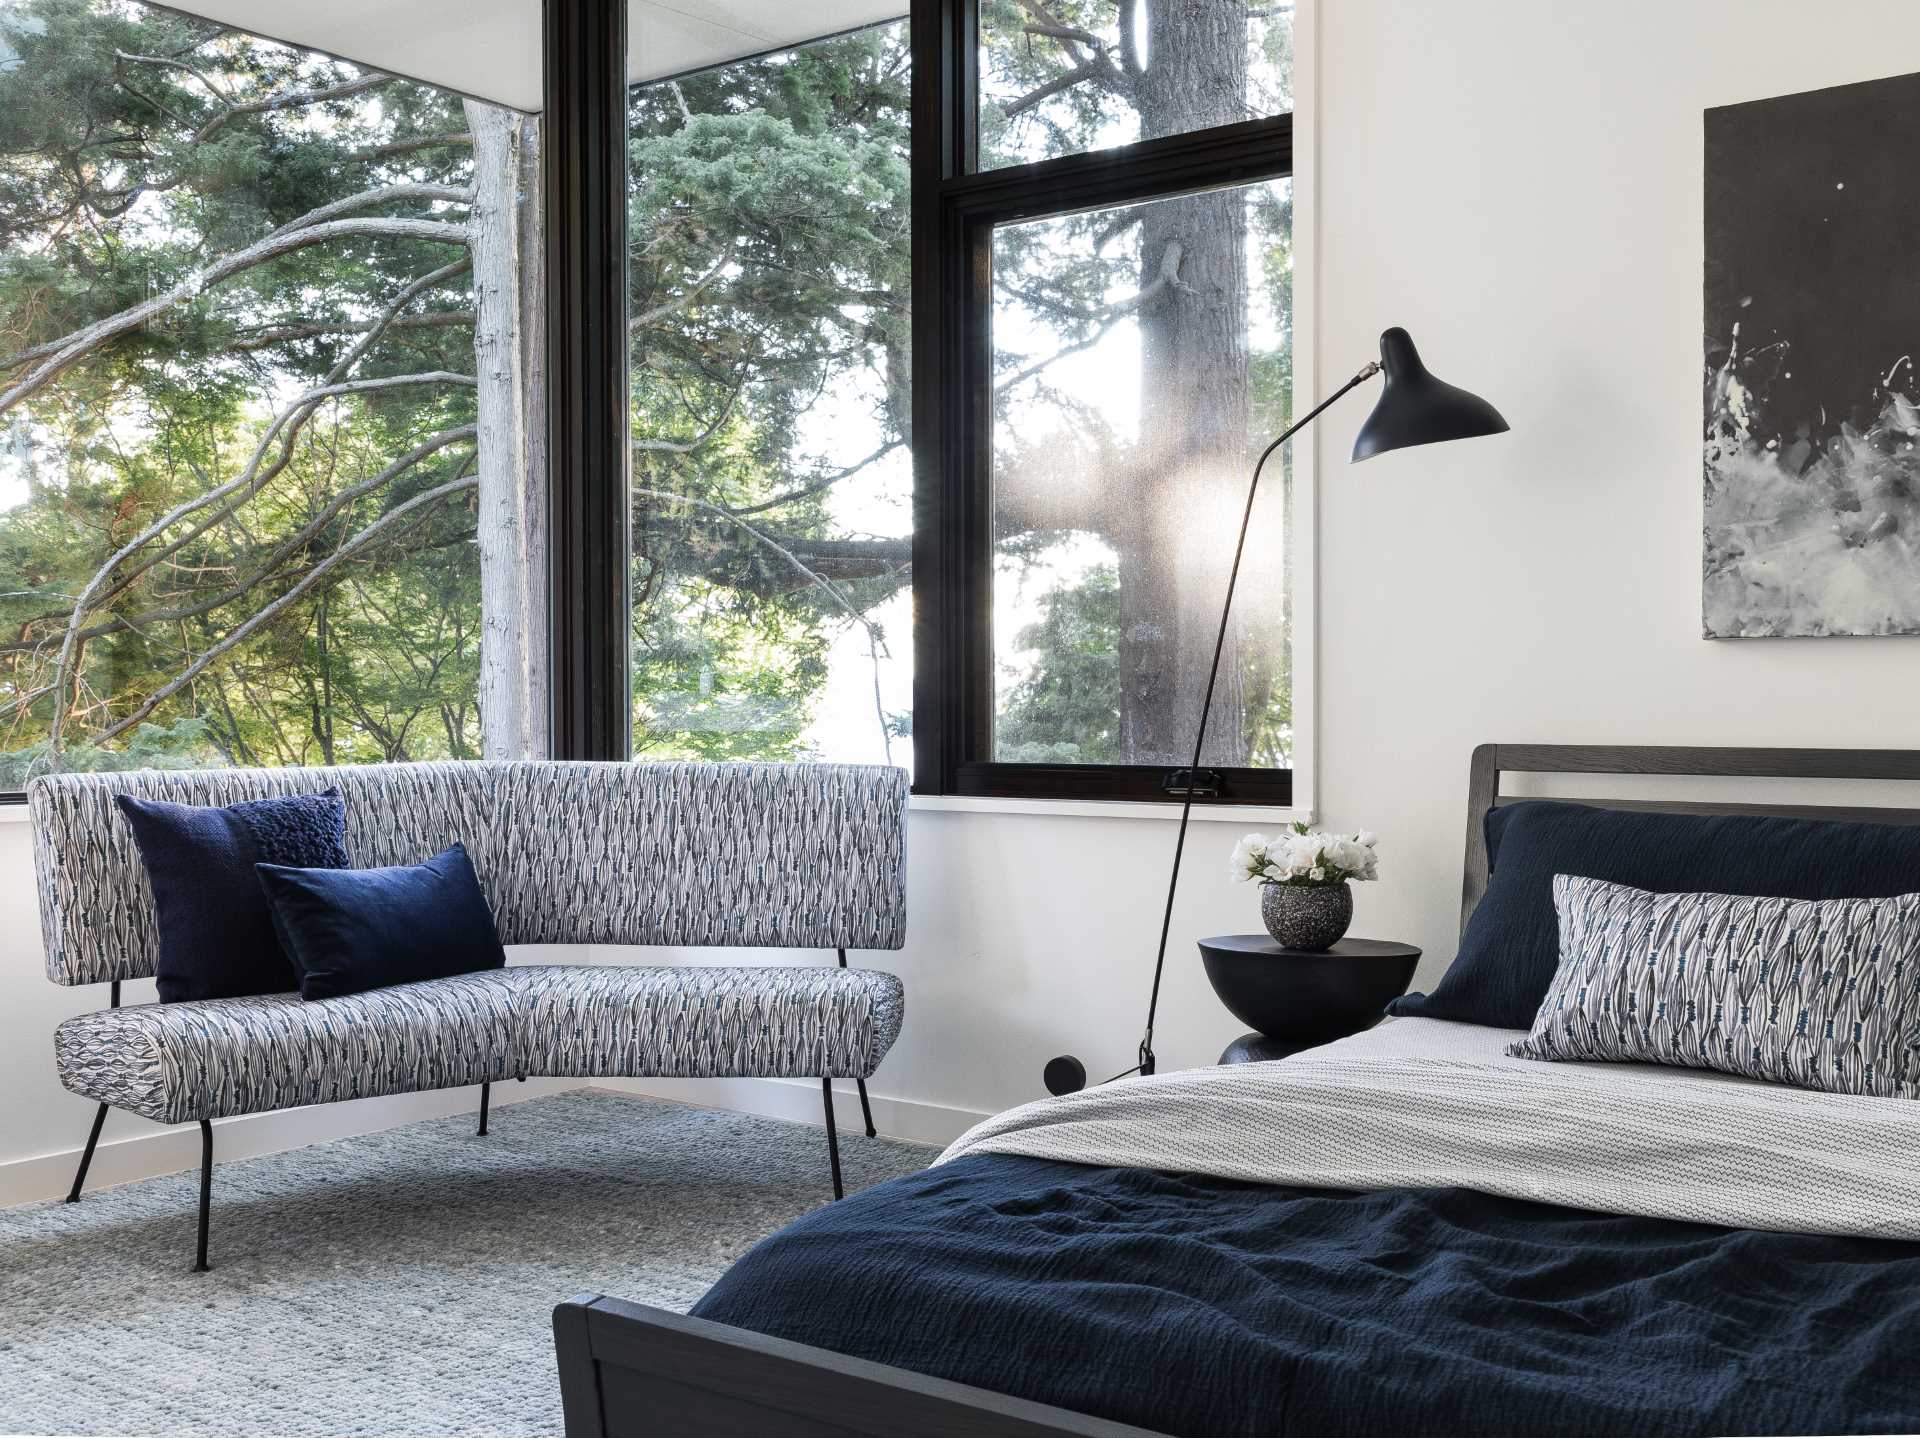 A modern black and grey bedroom with blue accents.